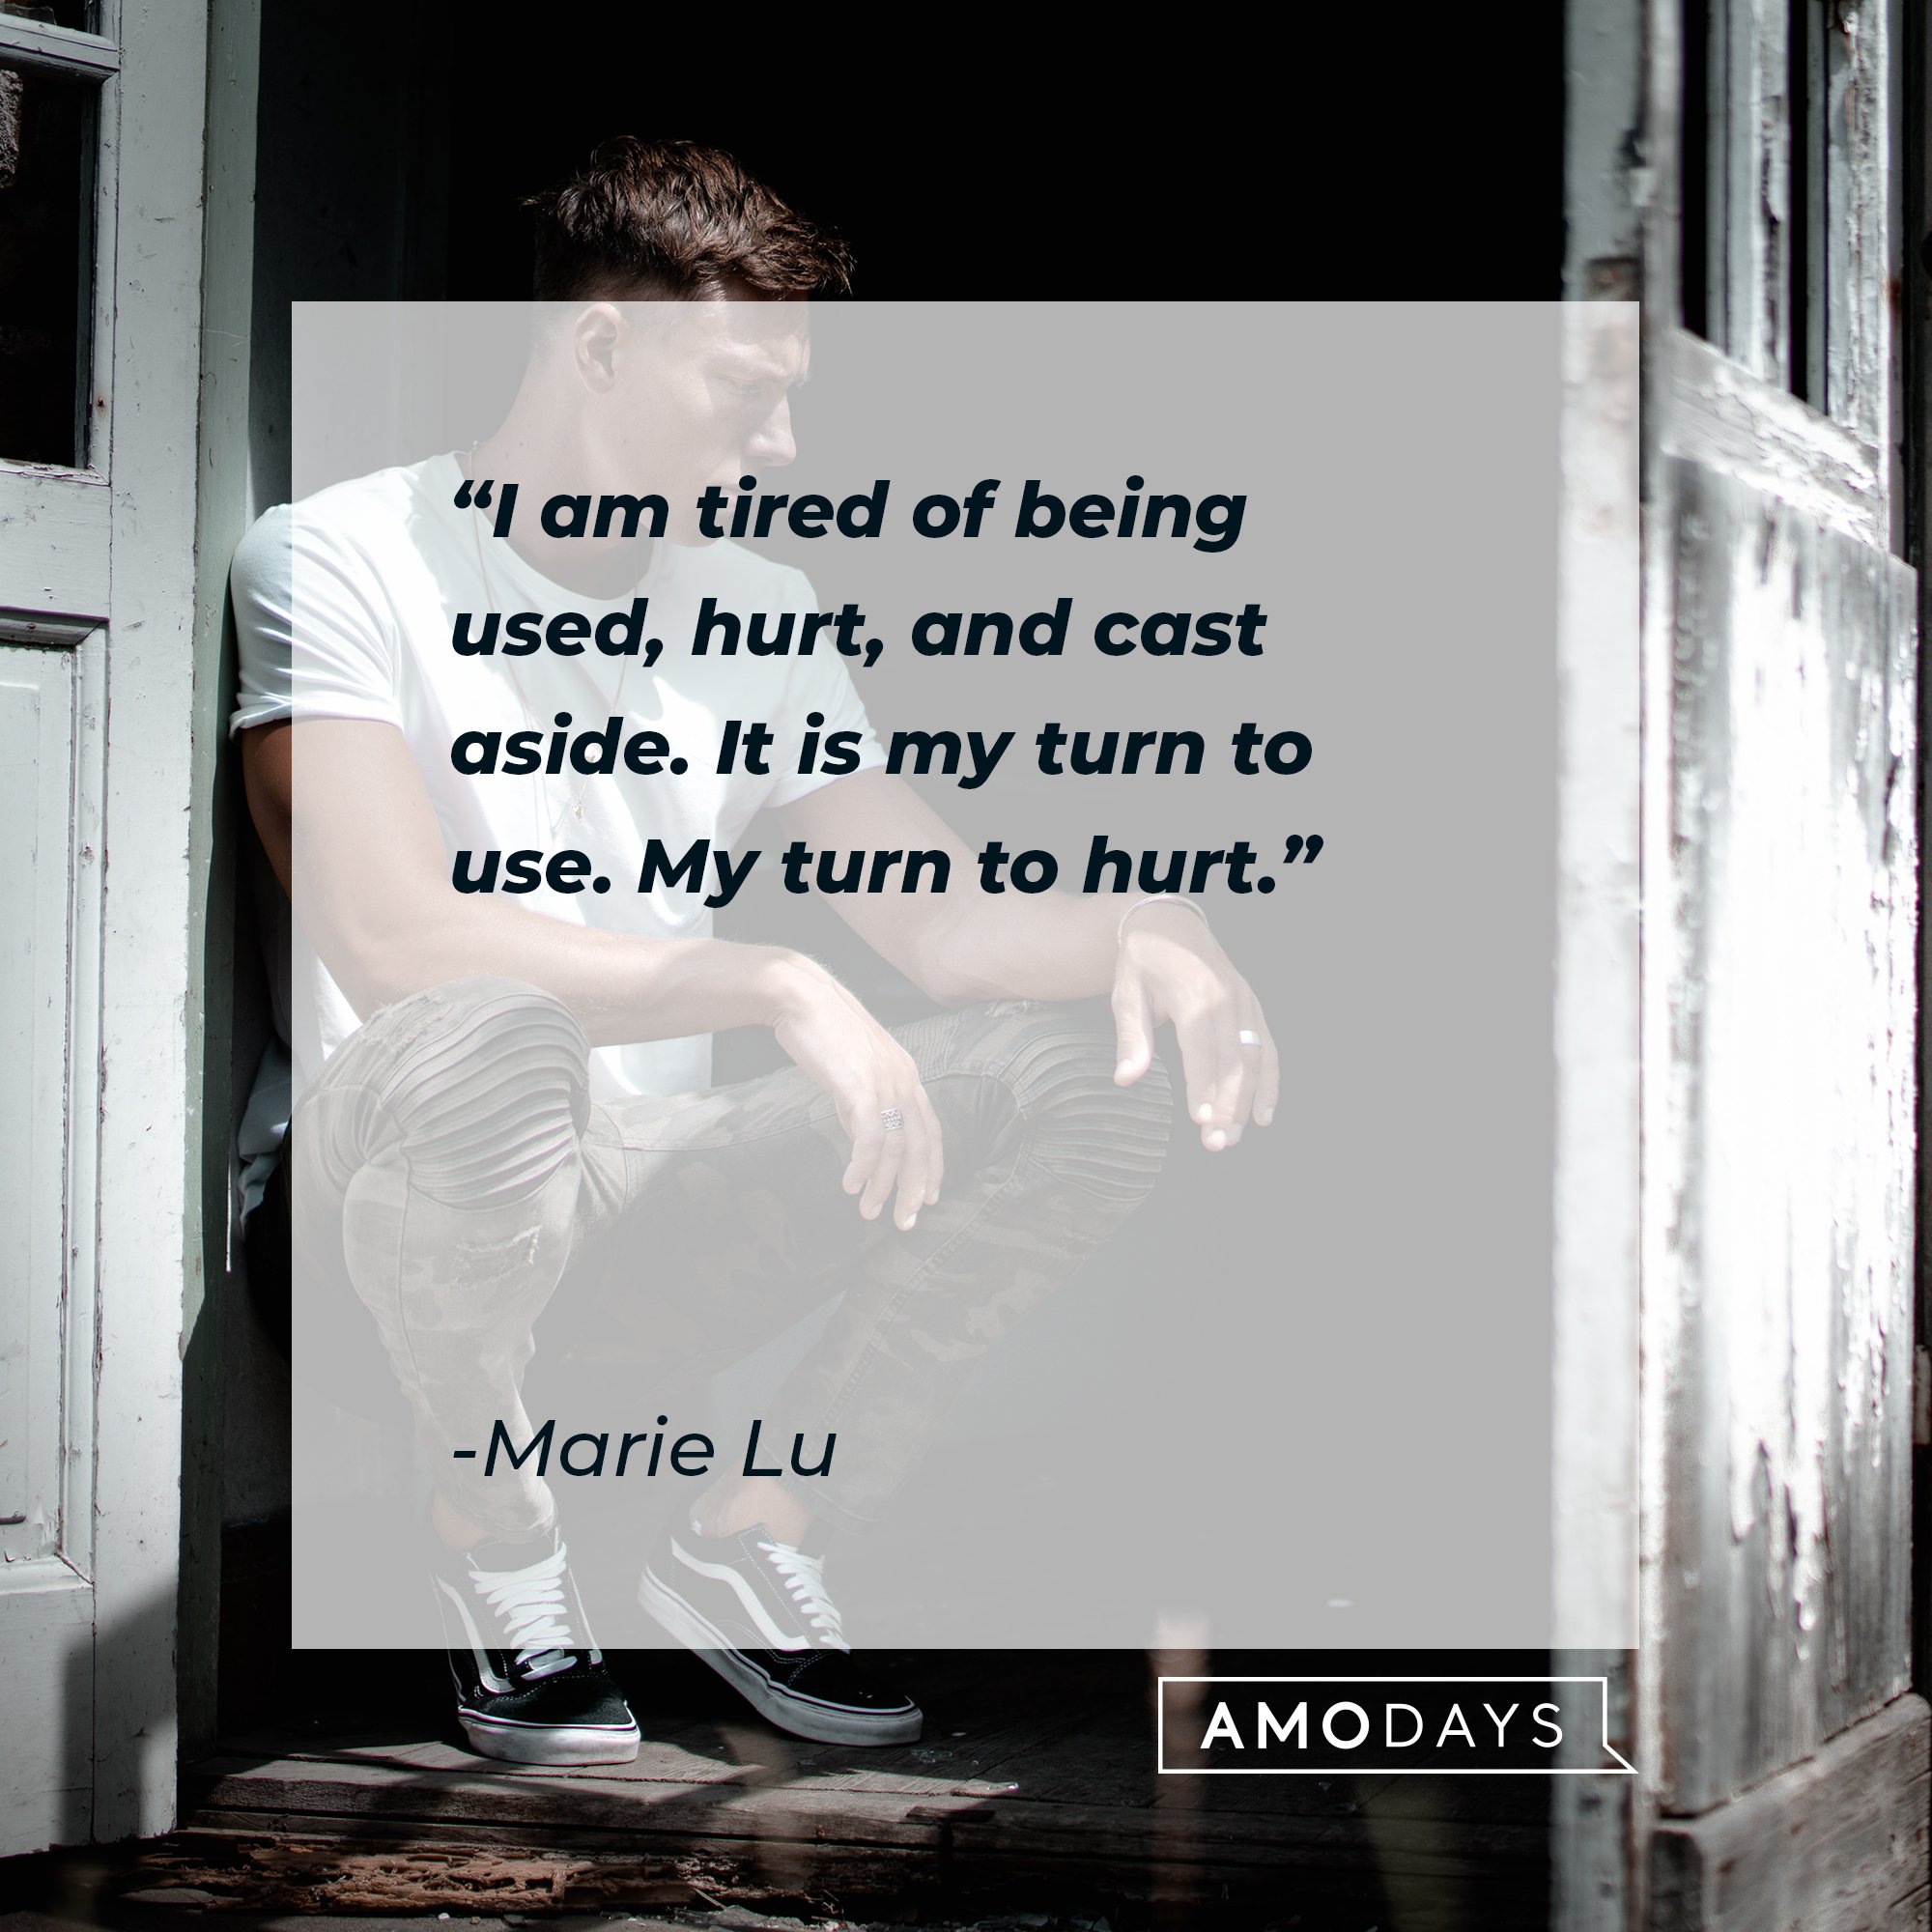 Marie Lu’s quote: "I am tired of being used, hurt, and cast aside. It is my turn to use. My turn to hurt." | Image: AmoDays